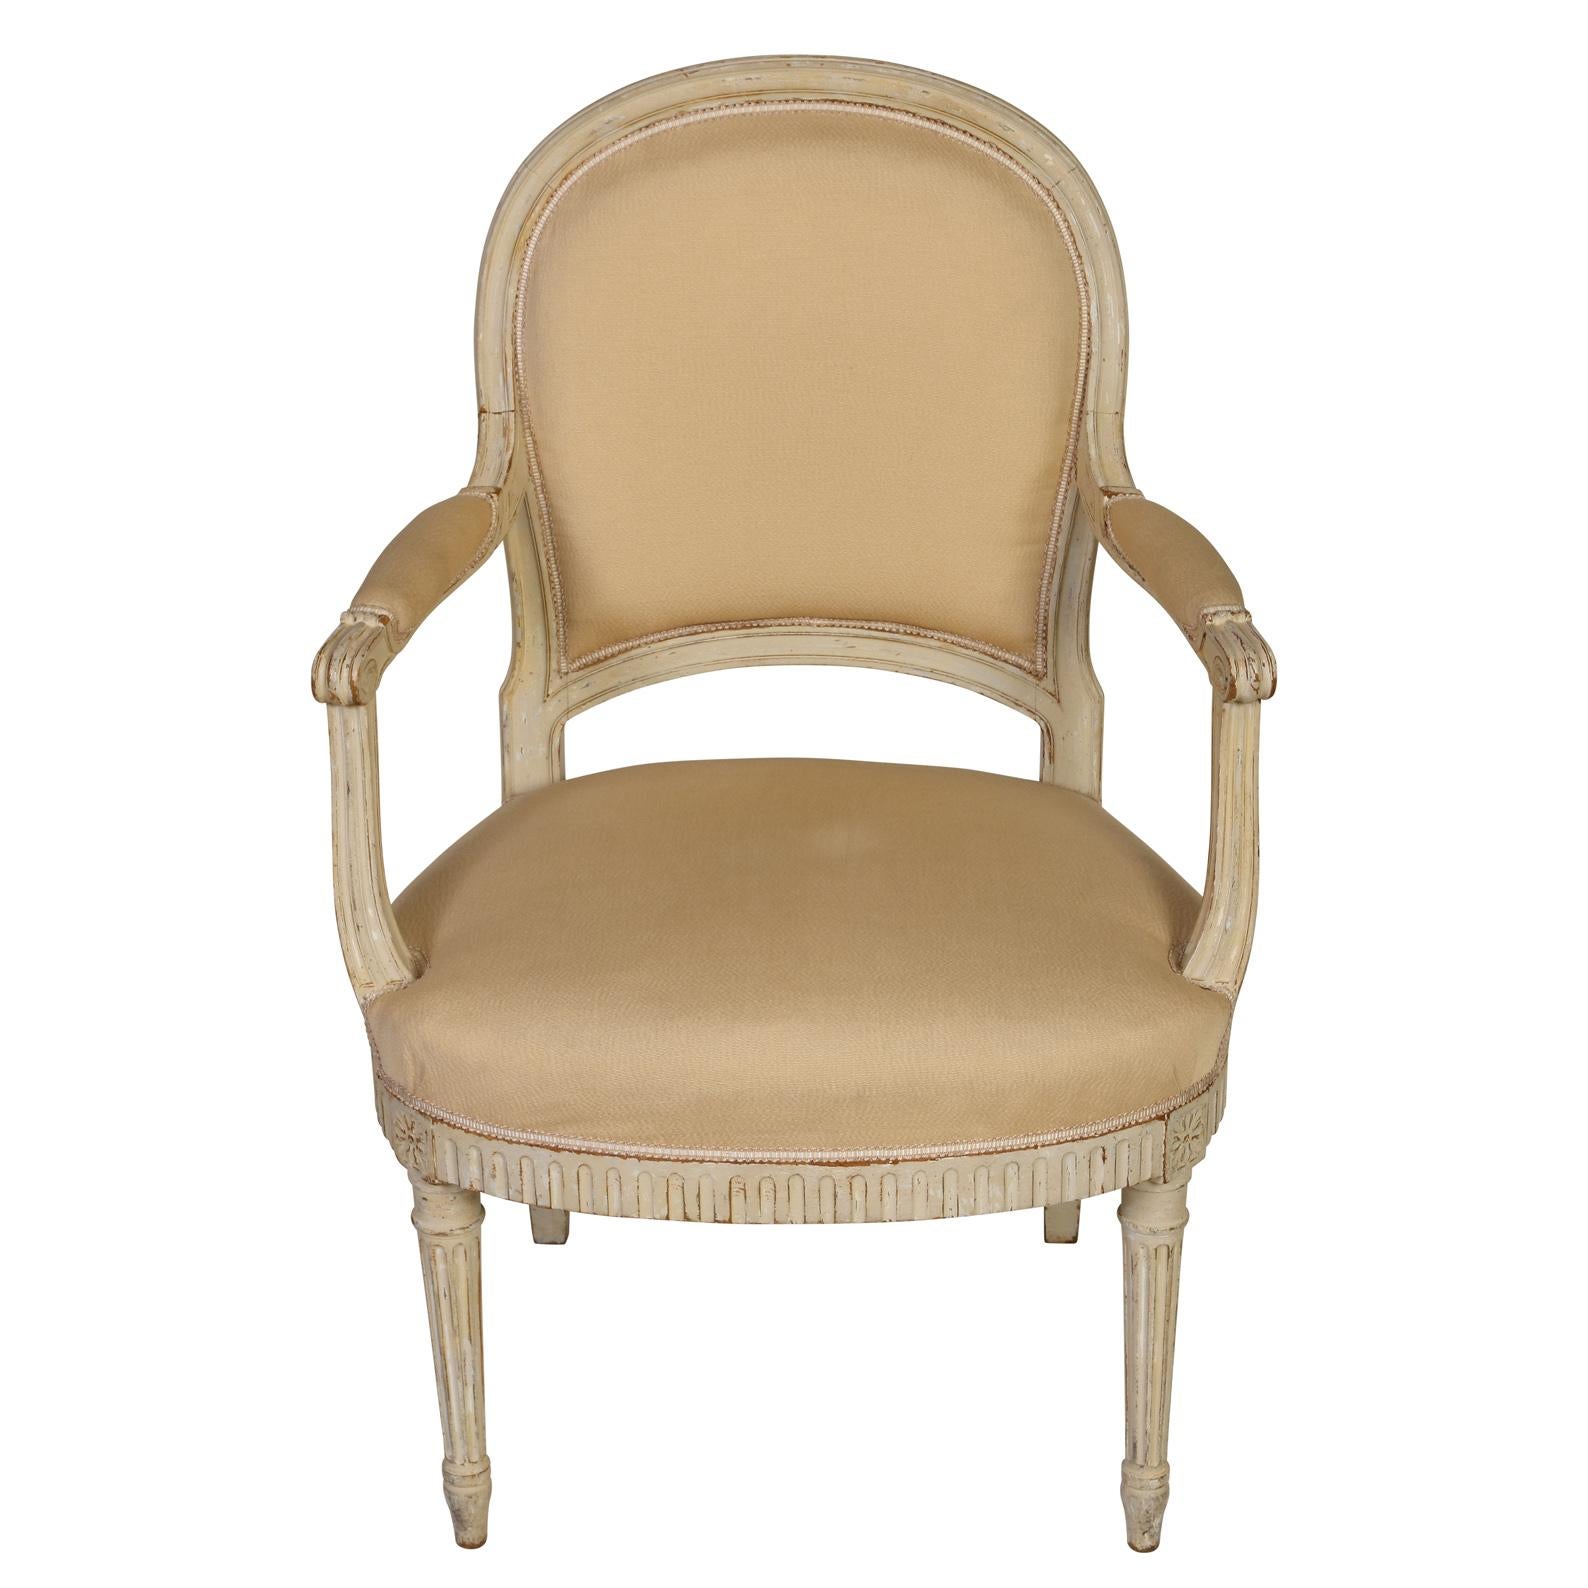 A pair of Louis XVI style fauteuils painted antique white and upholstered in a neutral cream fabric. Curved back and scroll arms with padded arm rests and fluted, carved seat apron with flower detail and fluted carved legs.